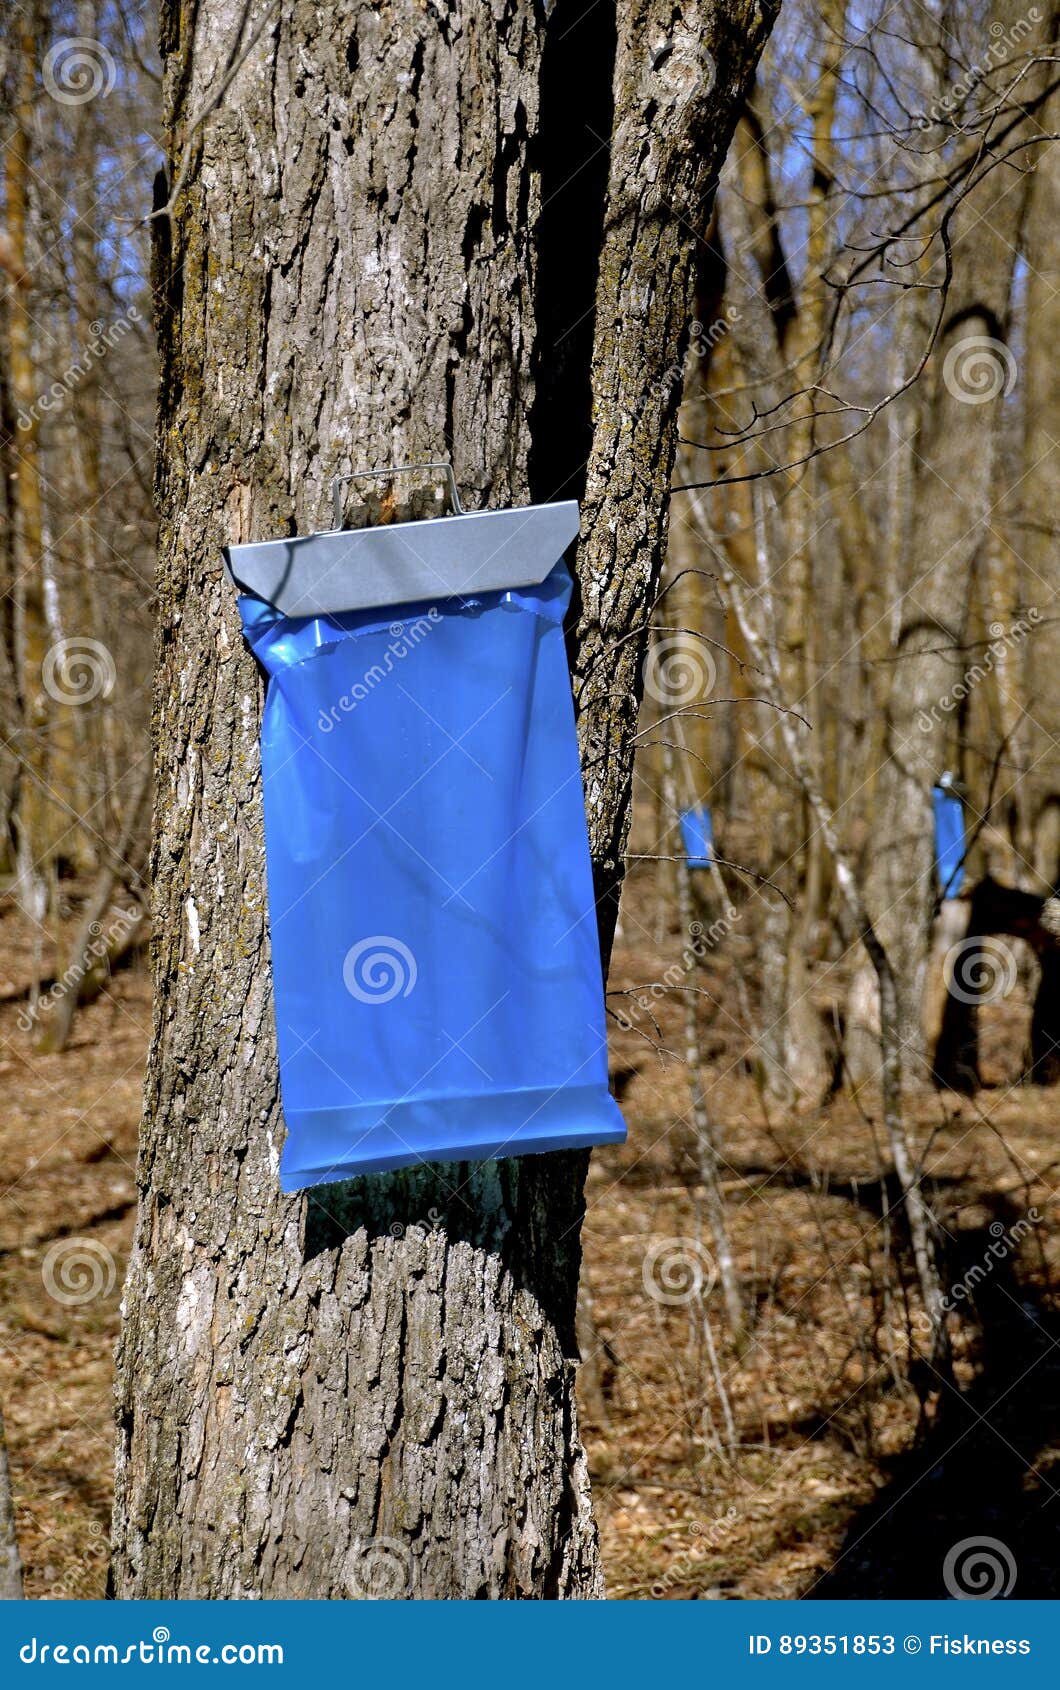 Erie MetroParks  Right now you will see blue bags  Facebook